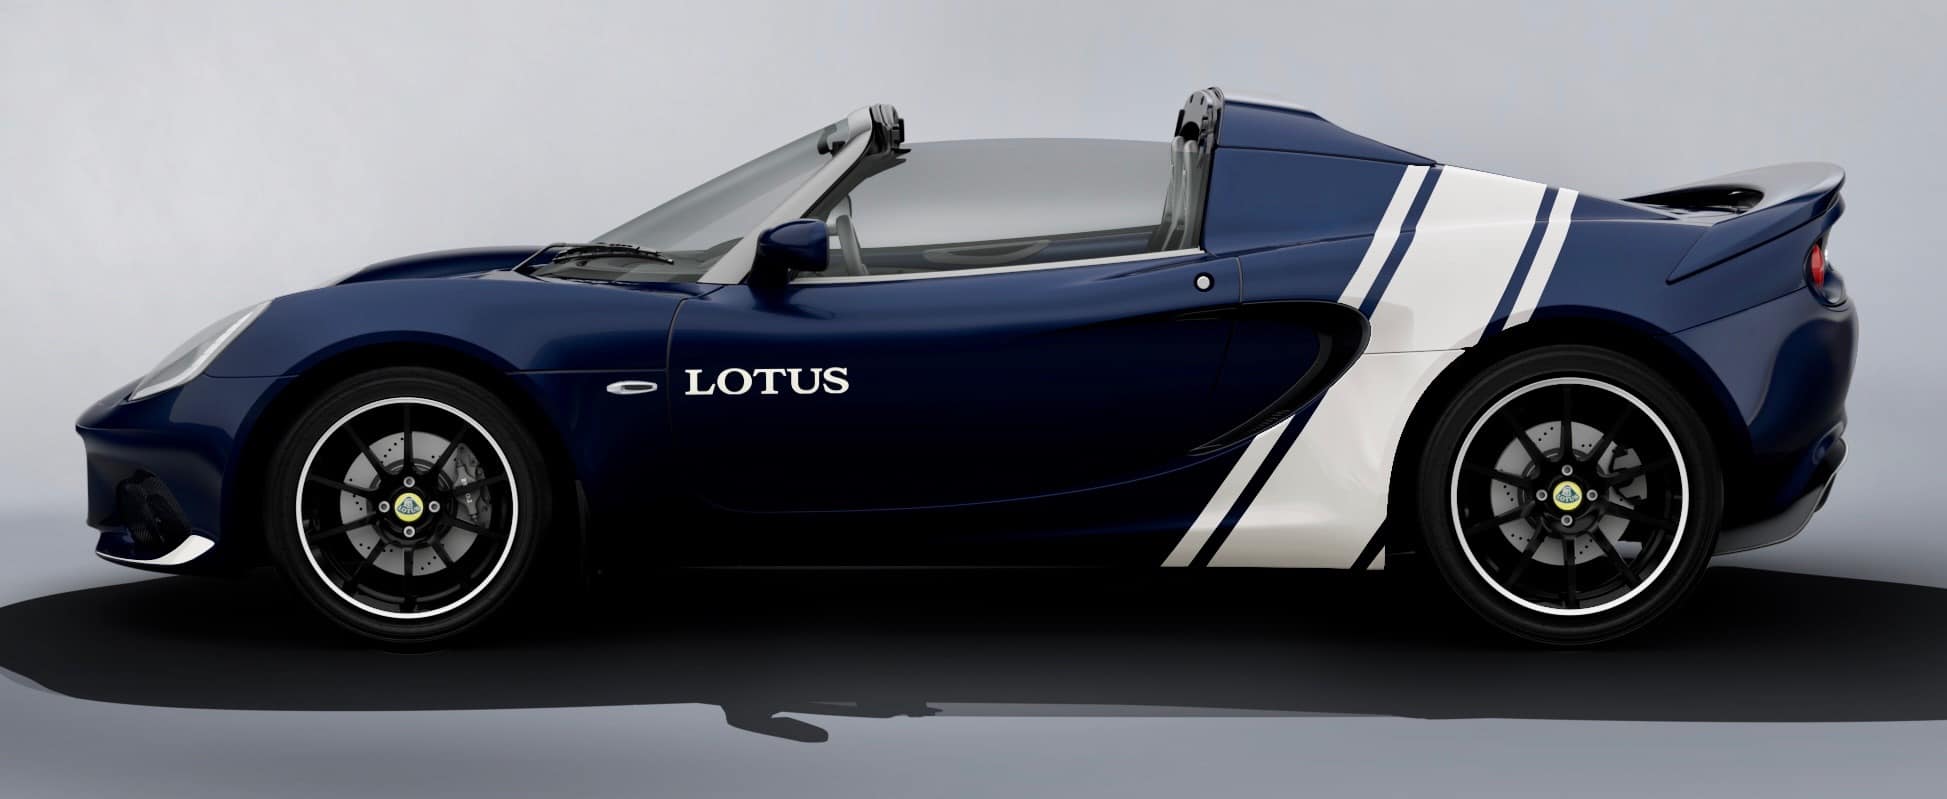 Lotus, Lotus offers special heritage liveries, ClassicCars.com Journal